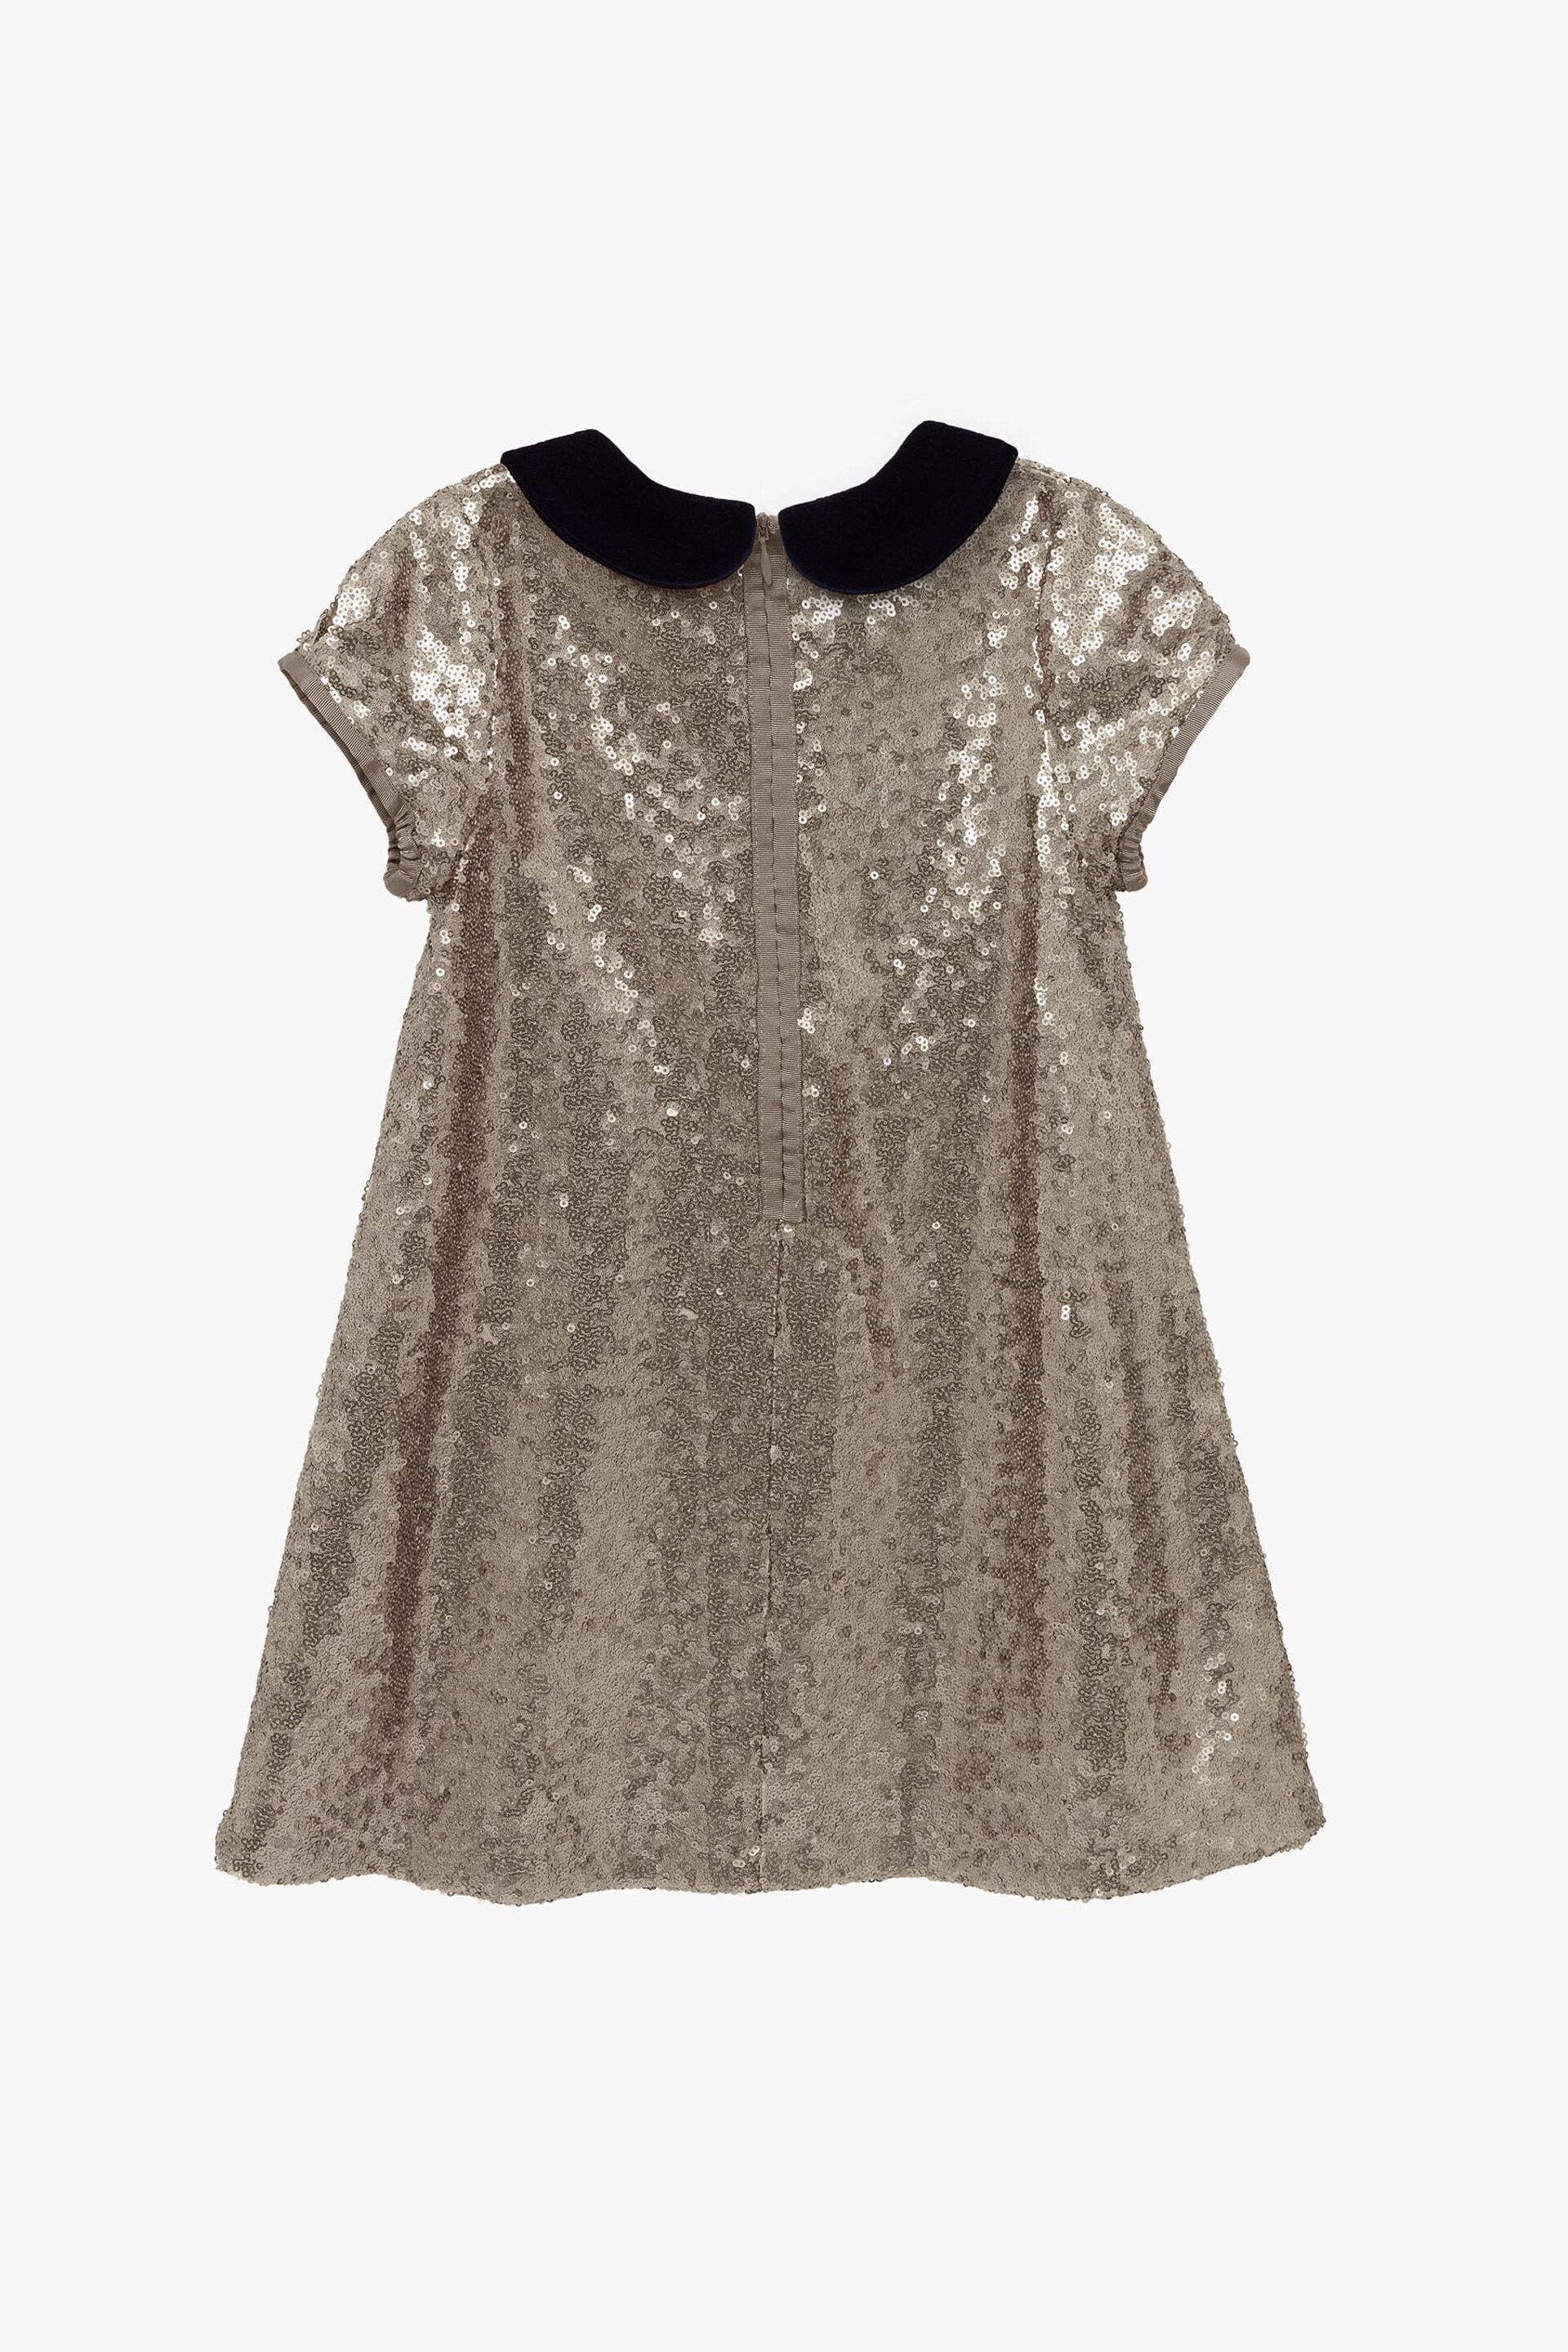 Trotters London Gold Sequin Christmas Party Dress - Image 6 of 7